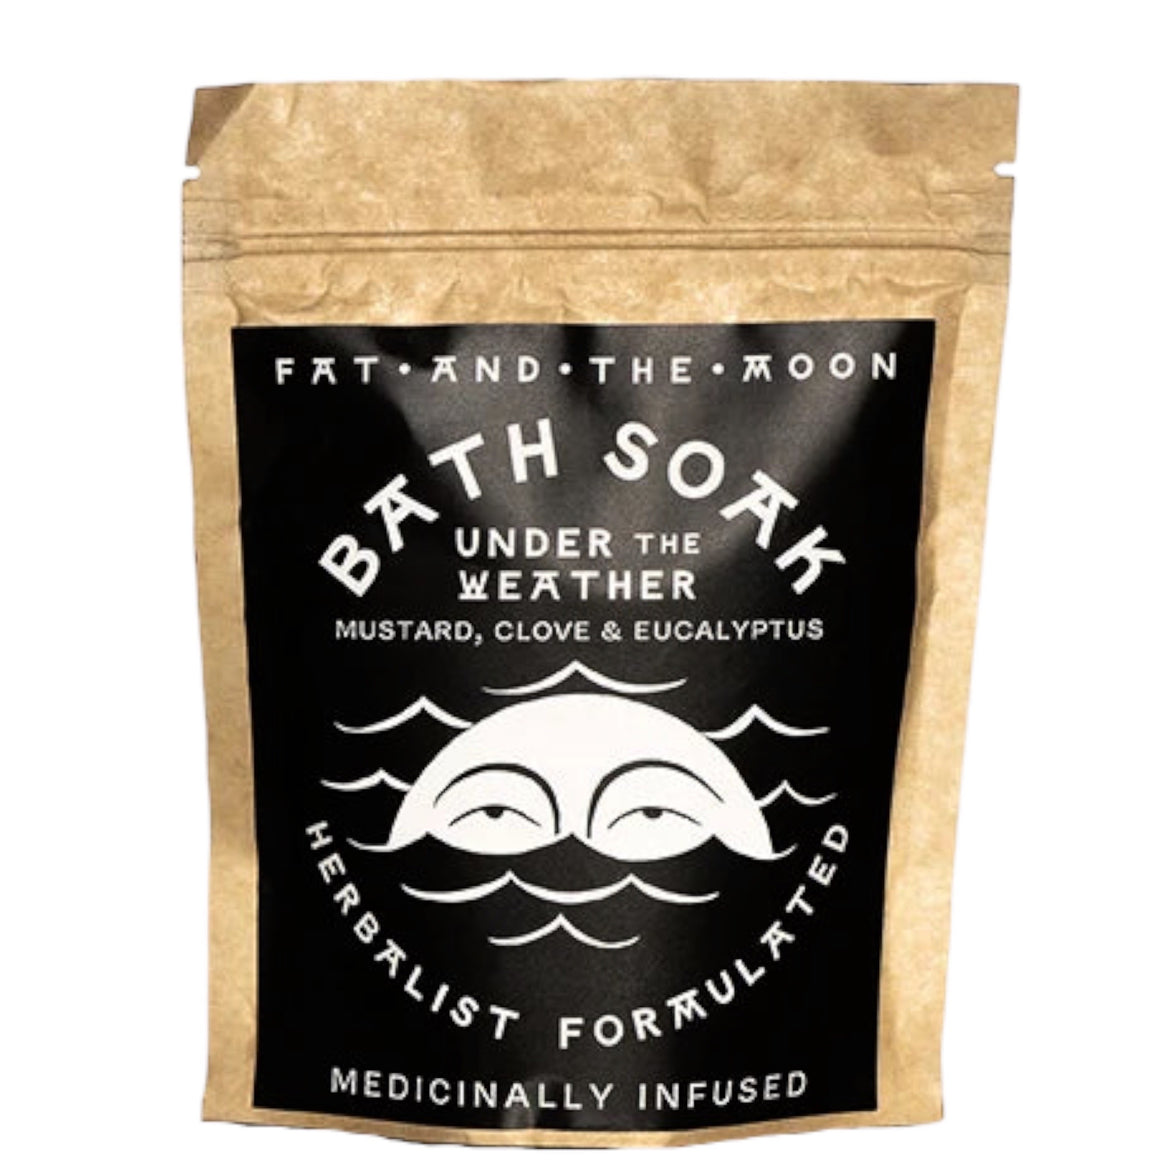 Bath Soak - Under The Weather - Fat & The Moon 6oz CLEARANCE